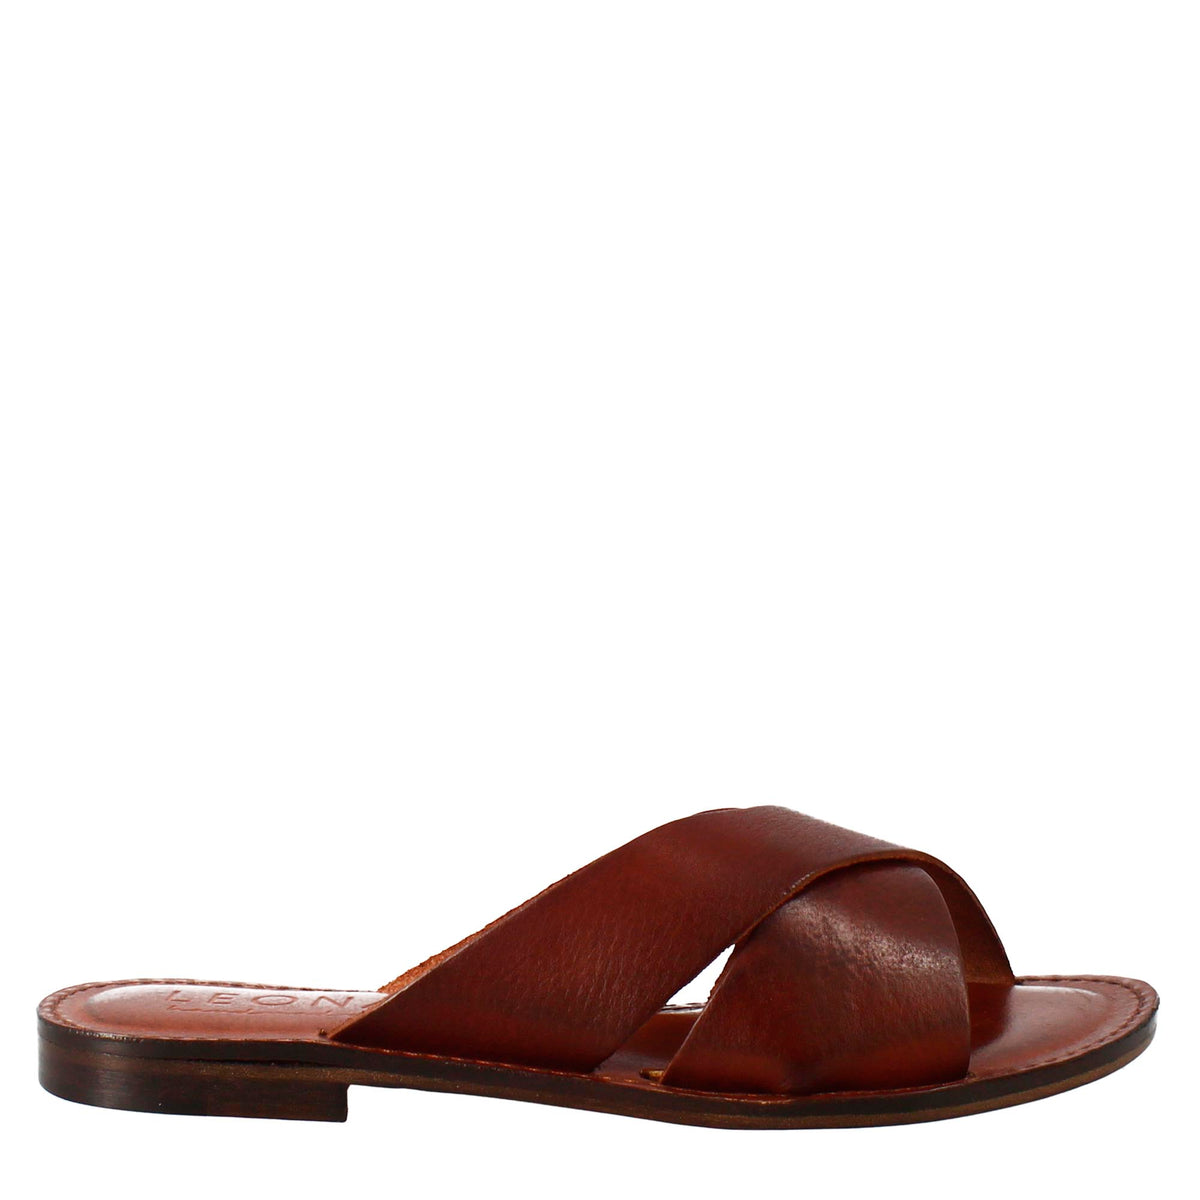 Incanto women's sandals in ancient Roman style in brown leather 